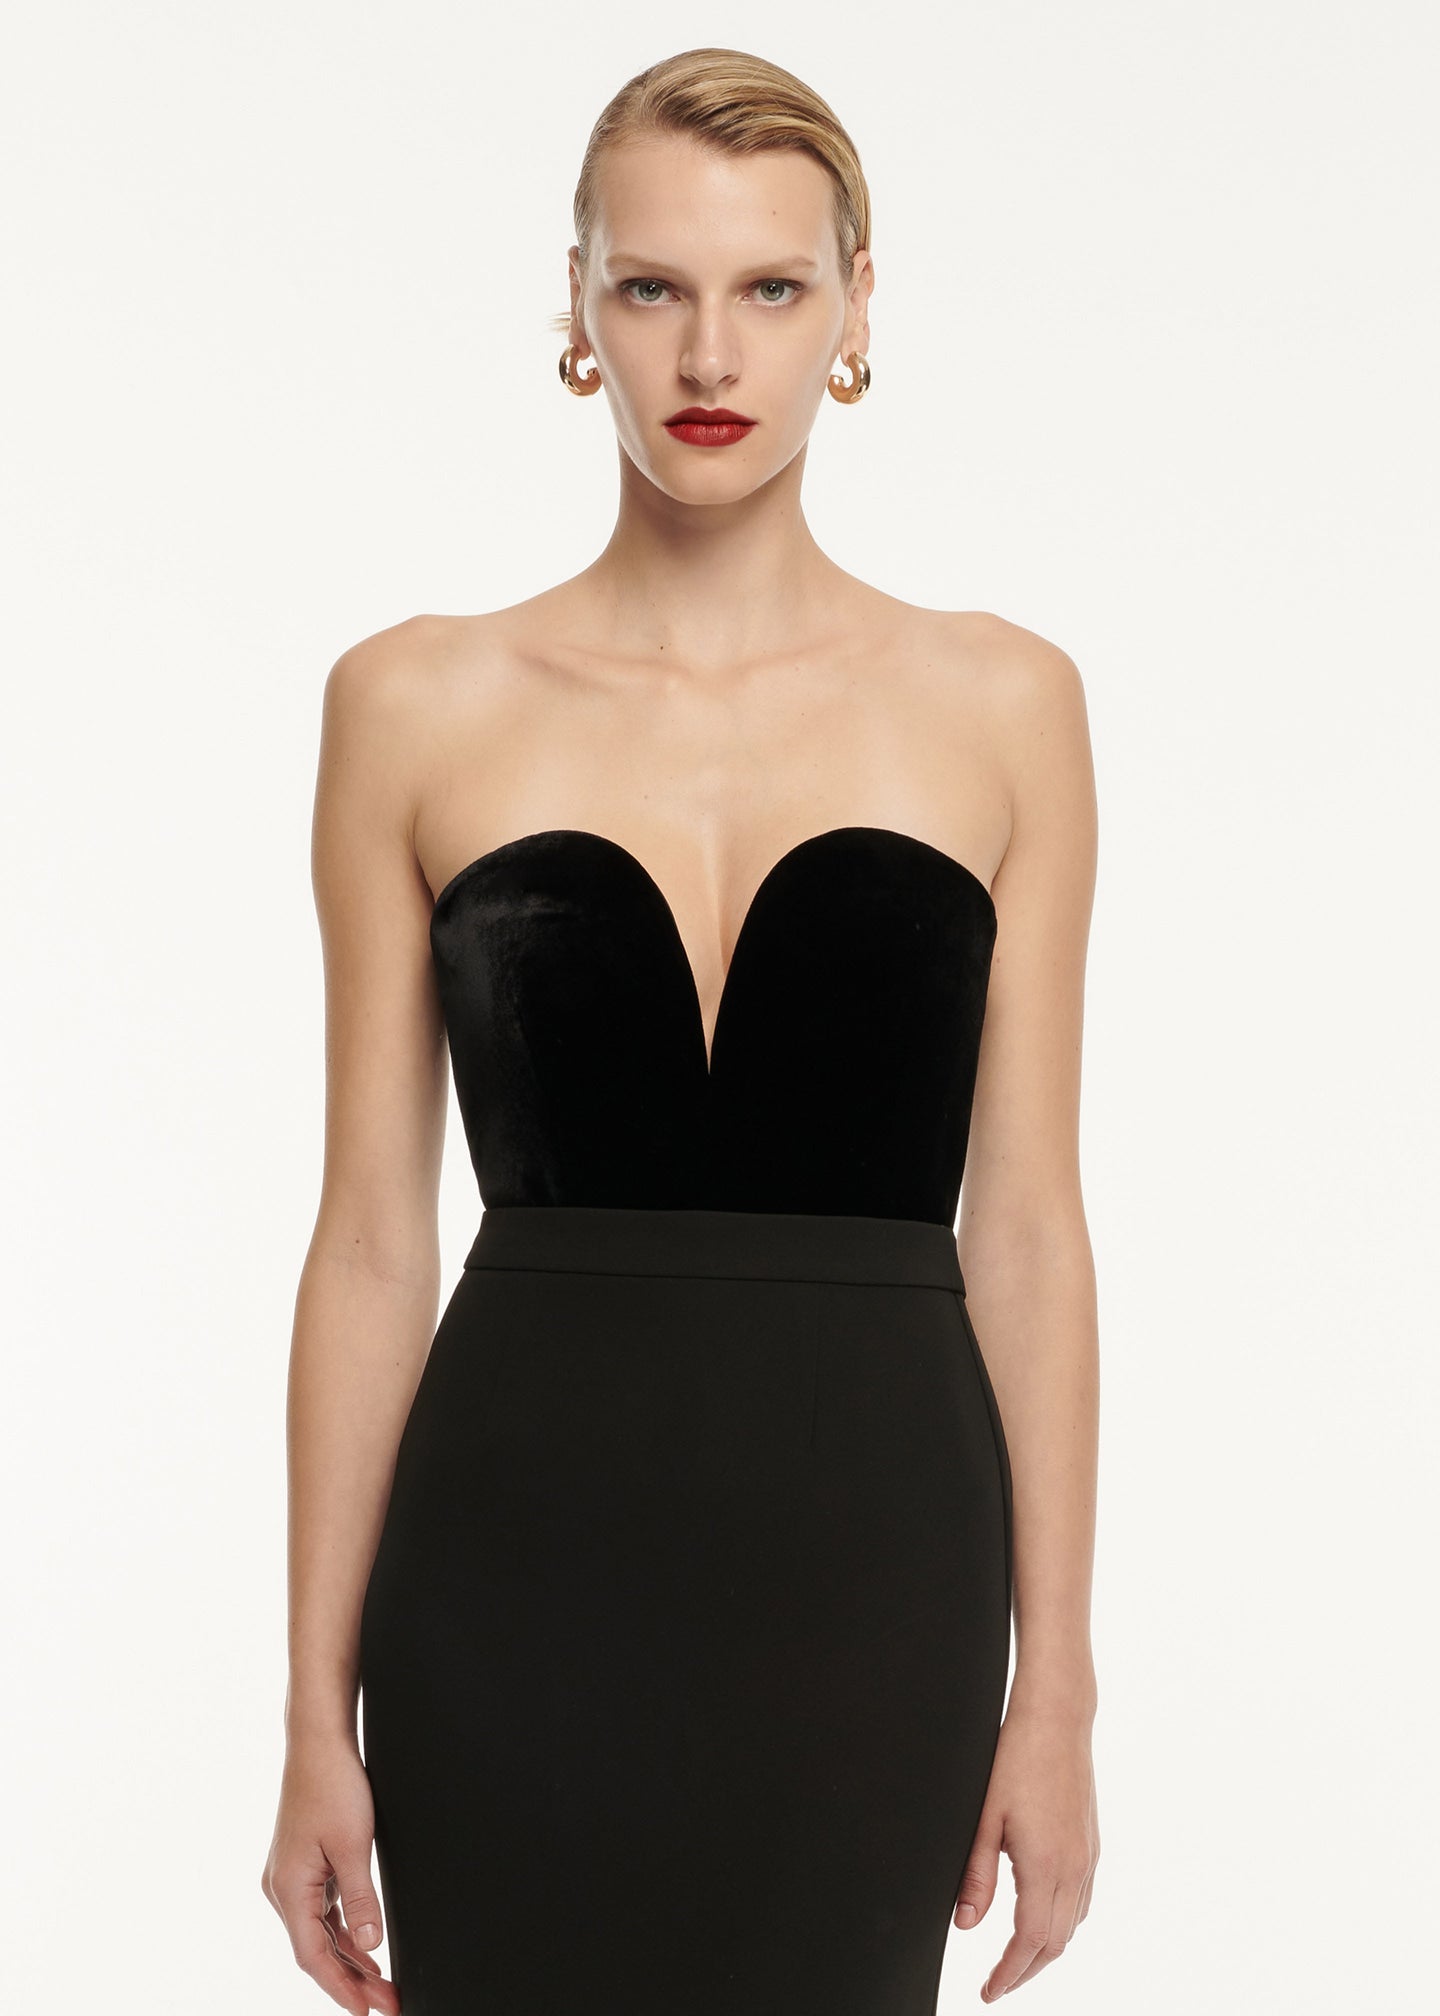 A close up of a woman wearing the Strapless Velvet Top Black